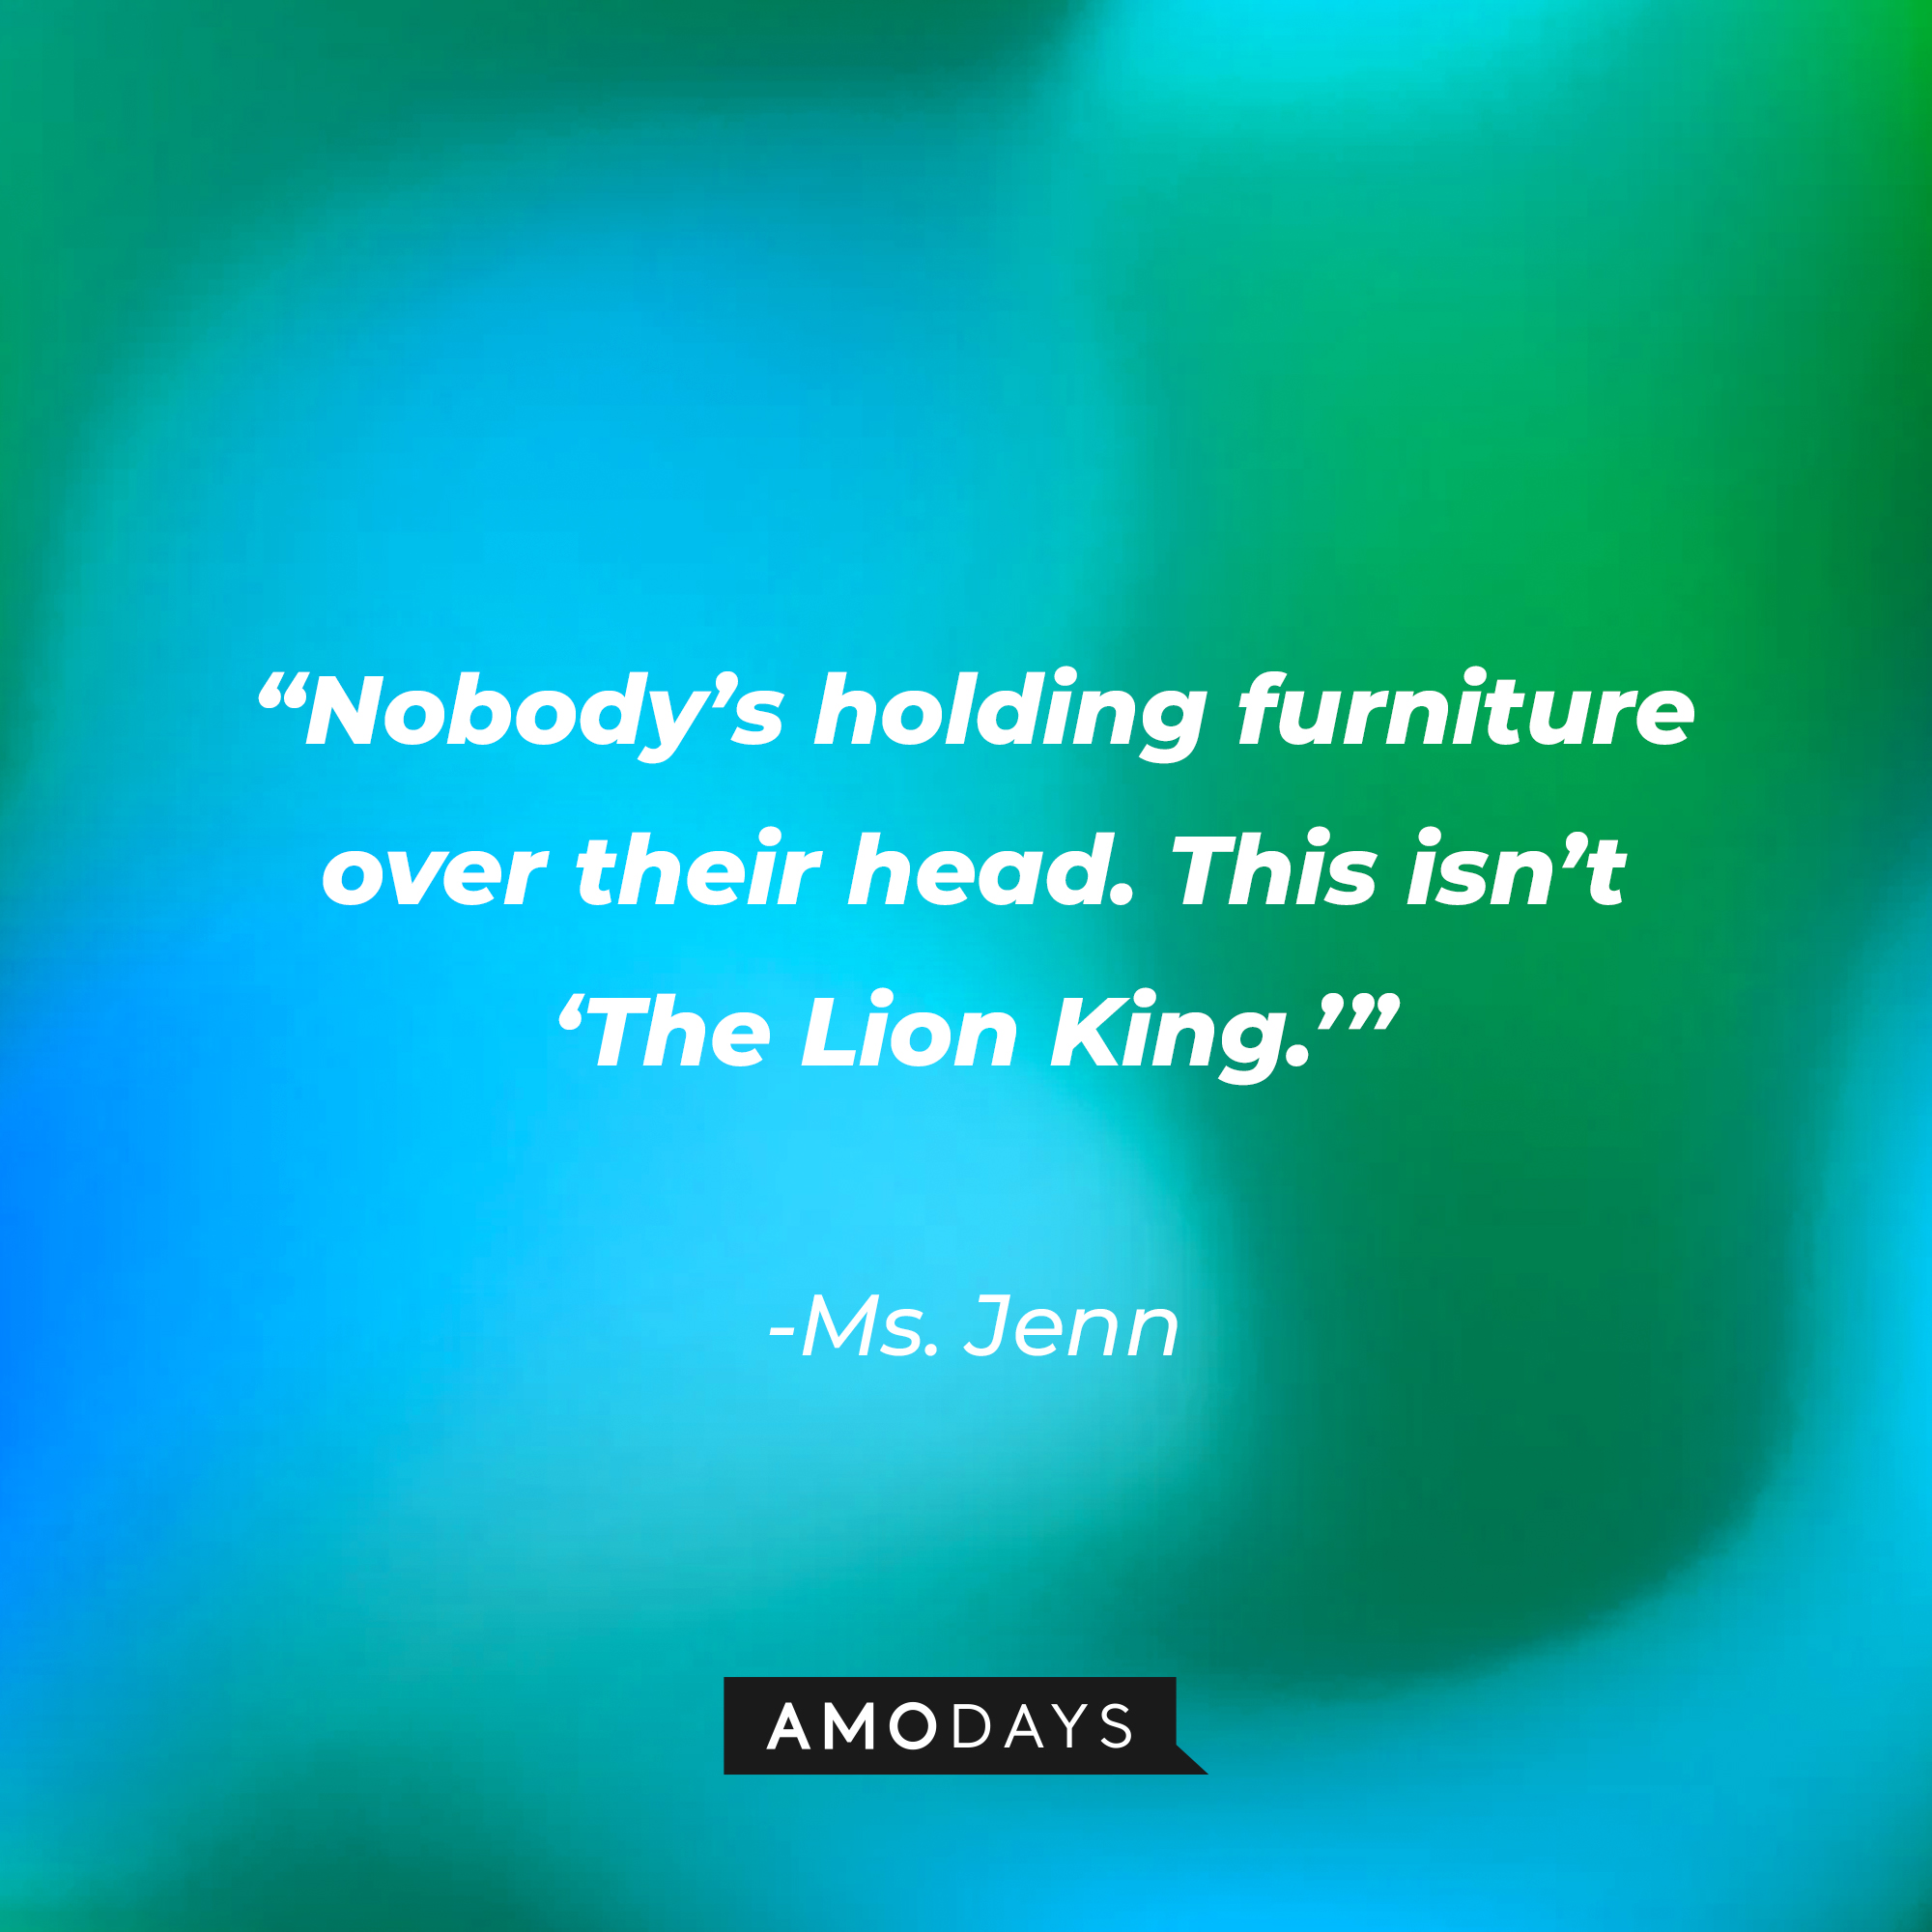 Ms. Jenn’s quote: "Nobody’s holding furniture over their head. This isn’t 'The Lion King."' | Source: AmoDays